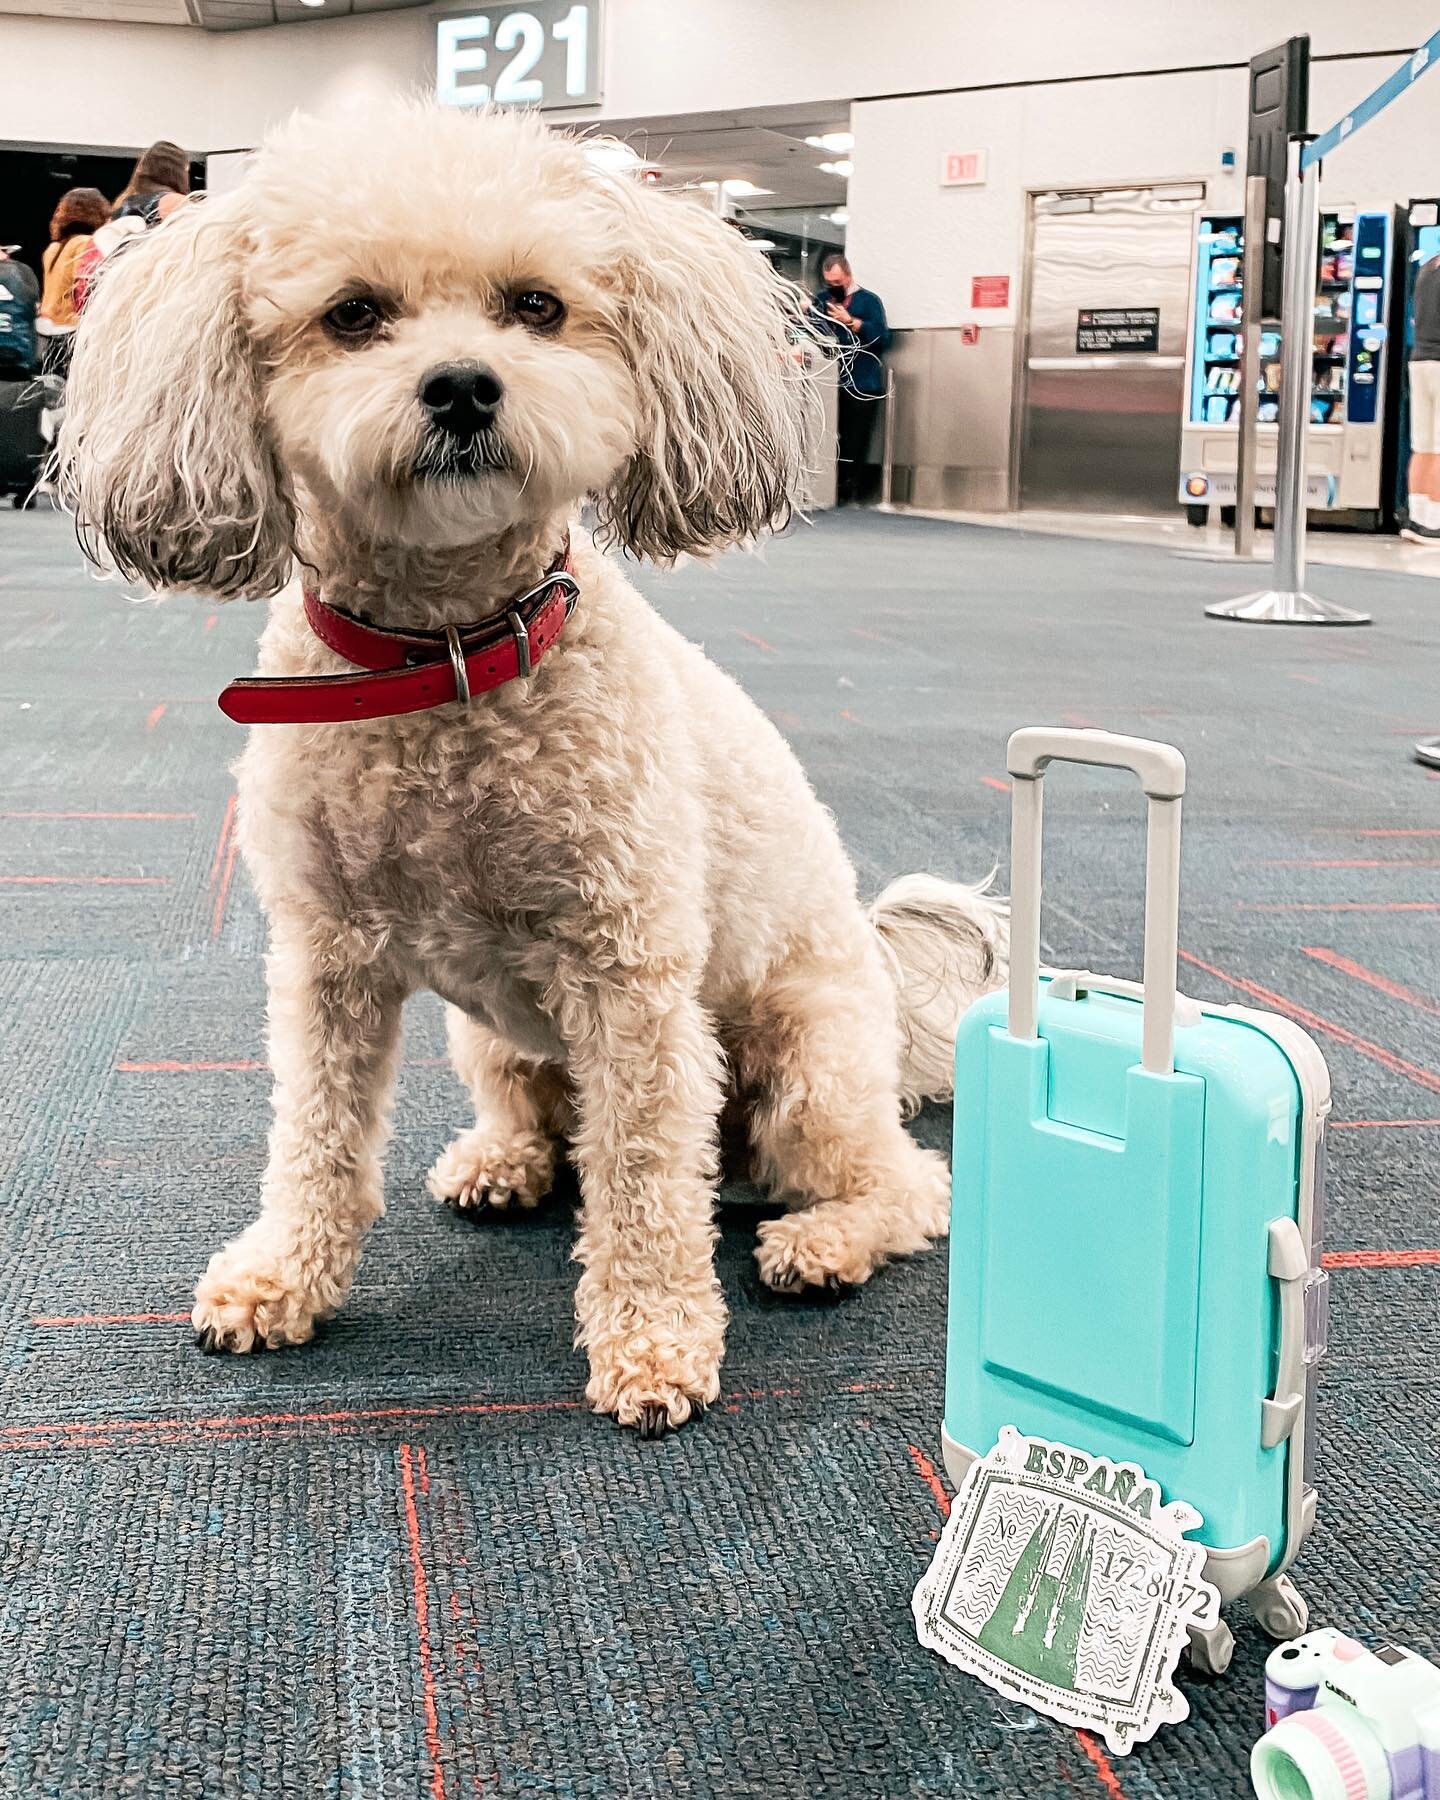 ✨Collect moments not things -Pepper 🐶
*SAVE THIS POST*

Today we fly MIA-MAD, one of the shortest transatlantic flights, to begin 50 days in Europe.

Pepper is no stranger to flying, but this is her longest flight at 8hrs 25min in the air, which was